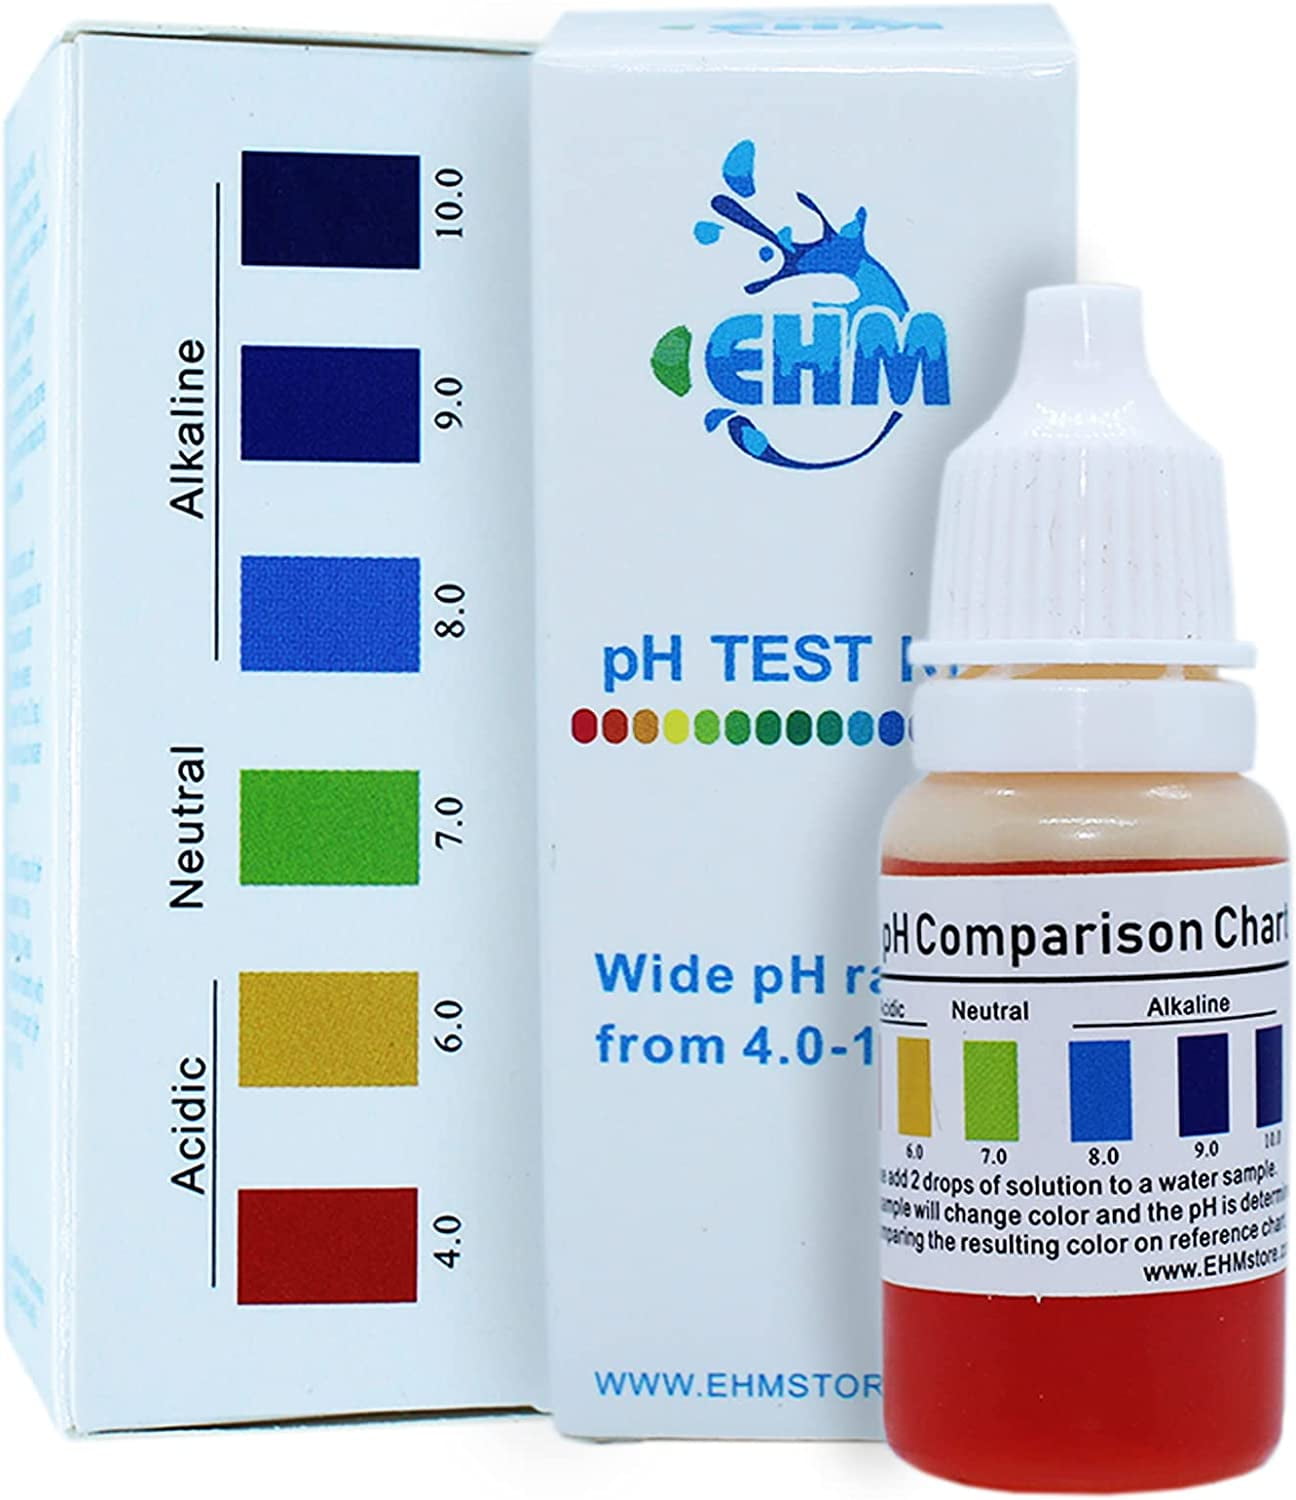 Just Fitter pH Test Strips for Testing Alkaline and Acid Levels in The  Body. Track & Monitor Your pH Level Using Saliva and Urine. Get Highly  Accurate